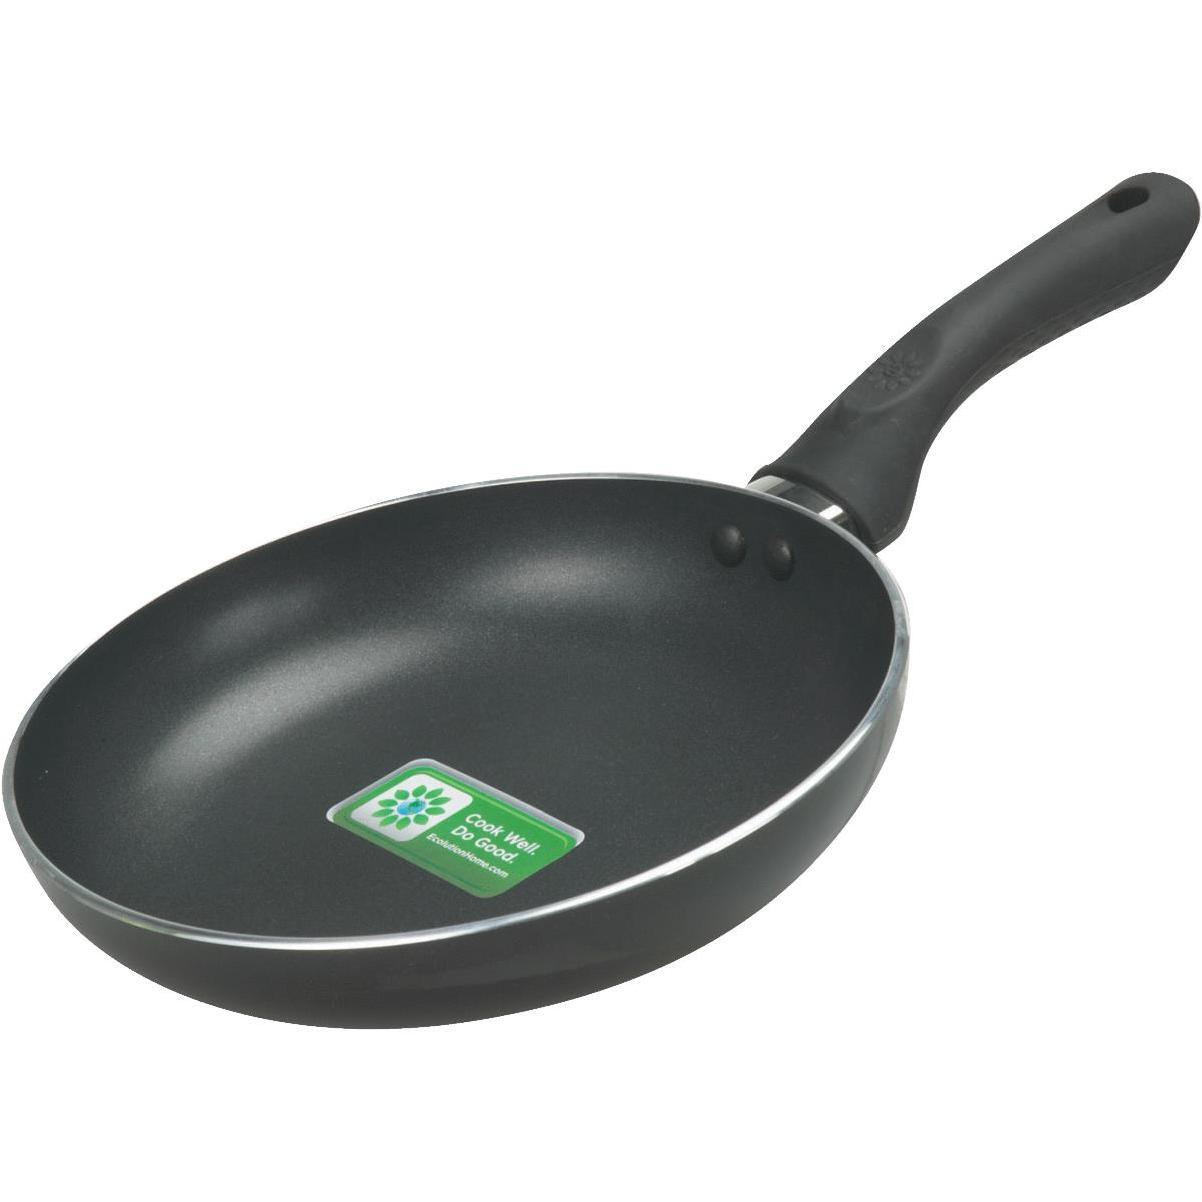 Ecolution Artistry 11 In. Black Aluminum Non-Stick Fry Pan